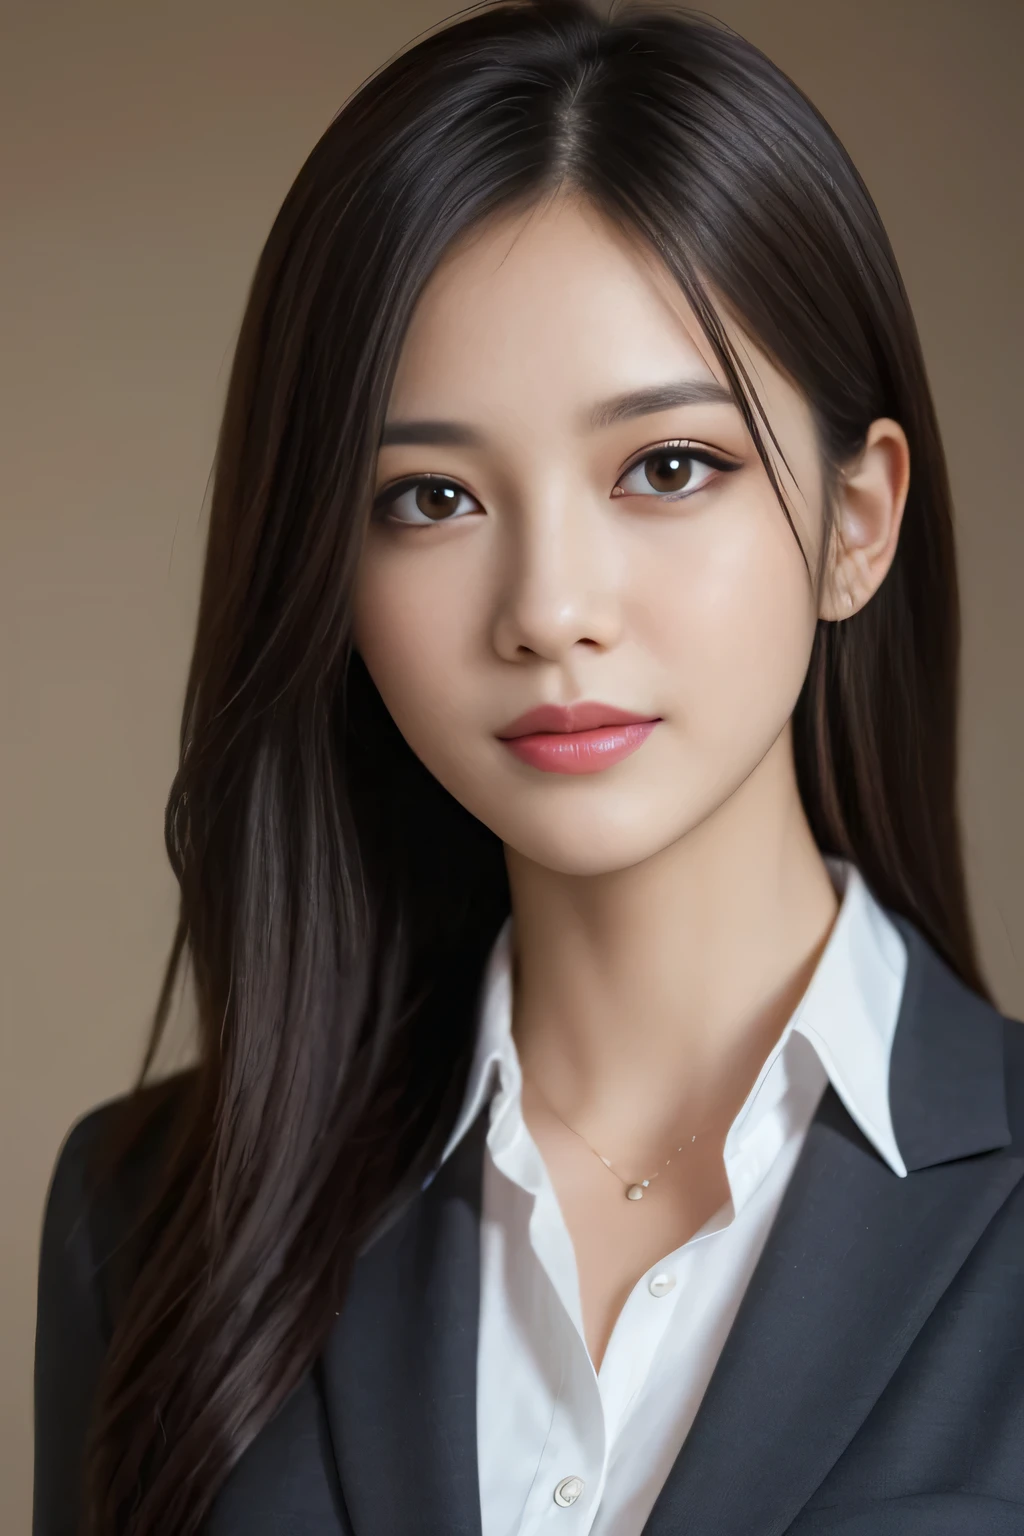 pieces fly, highest quality, realistic, Super detailed, finely, High resolution, 8K Dende Wallpaper, 1 beautiful woman,, light brown messy hair, wearing a business suit, sharp focus, perfect dynamic composition, beautiful and detailed eyes, fine hair, Detailed realistic skin texture, smile, close-up portrait, model body shape